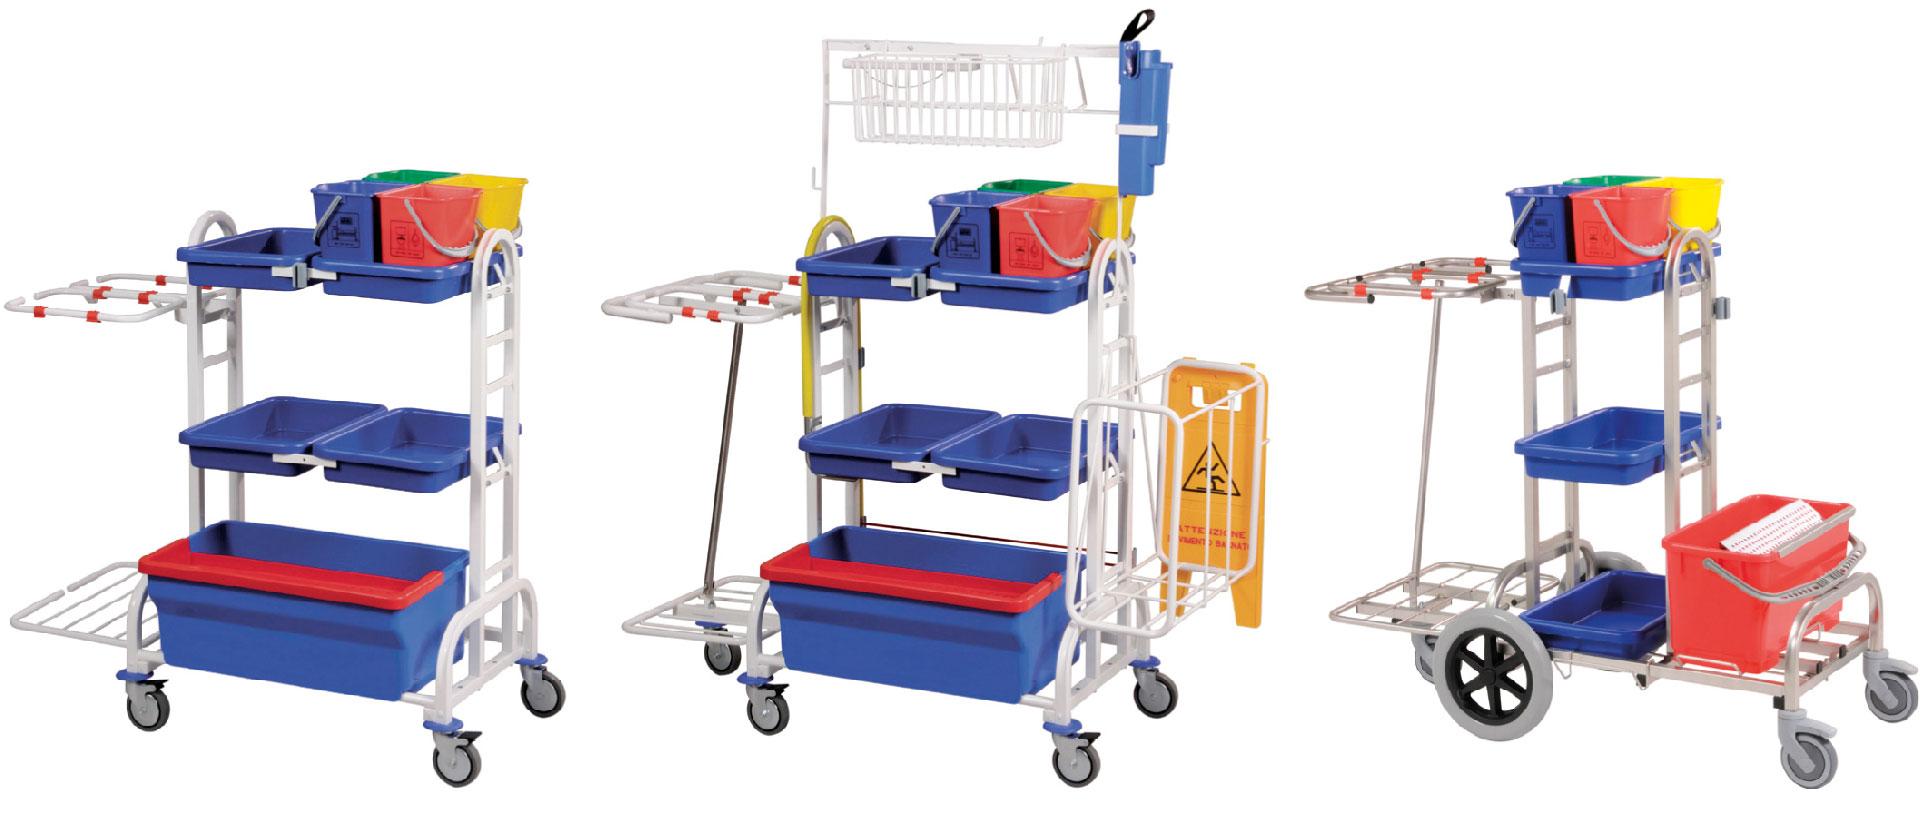 Rapid cleaning trolleys for hospitals